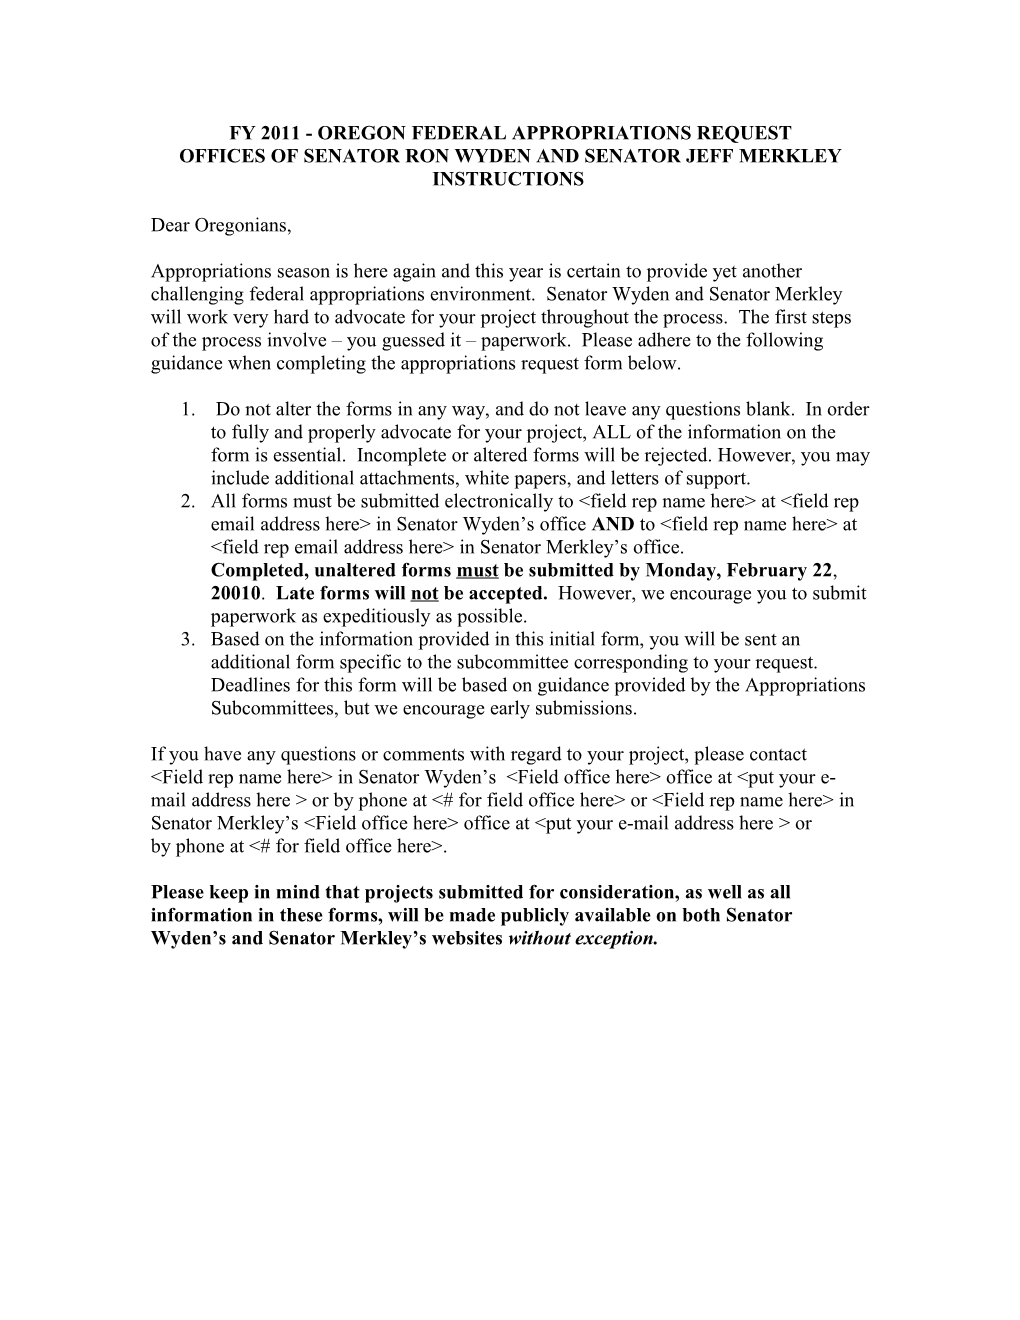 Fy 2008 - Oregon Federal Appropriations Request